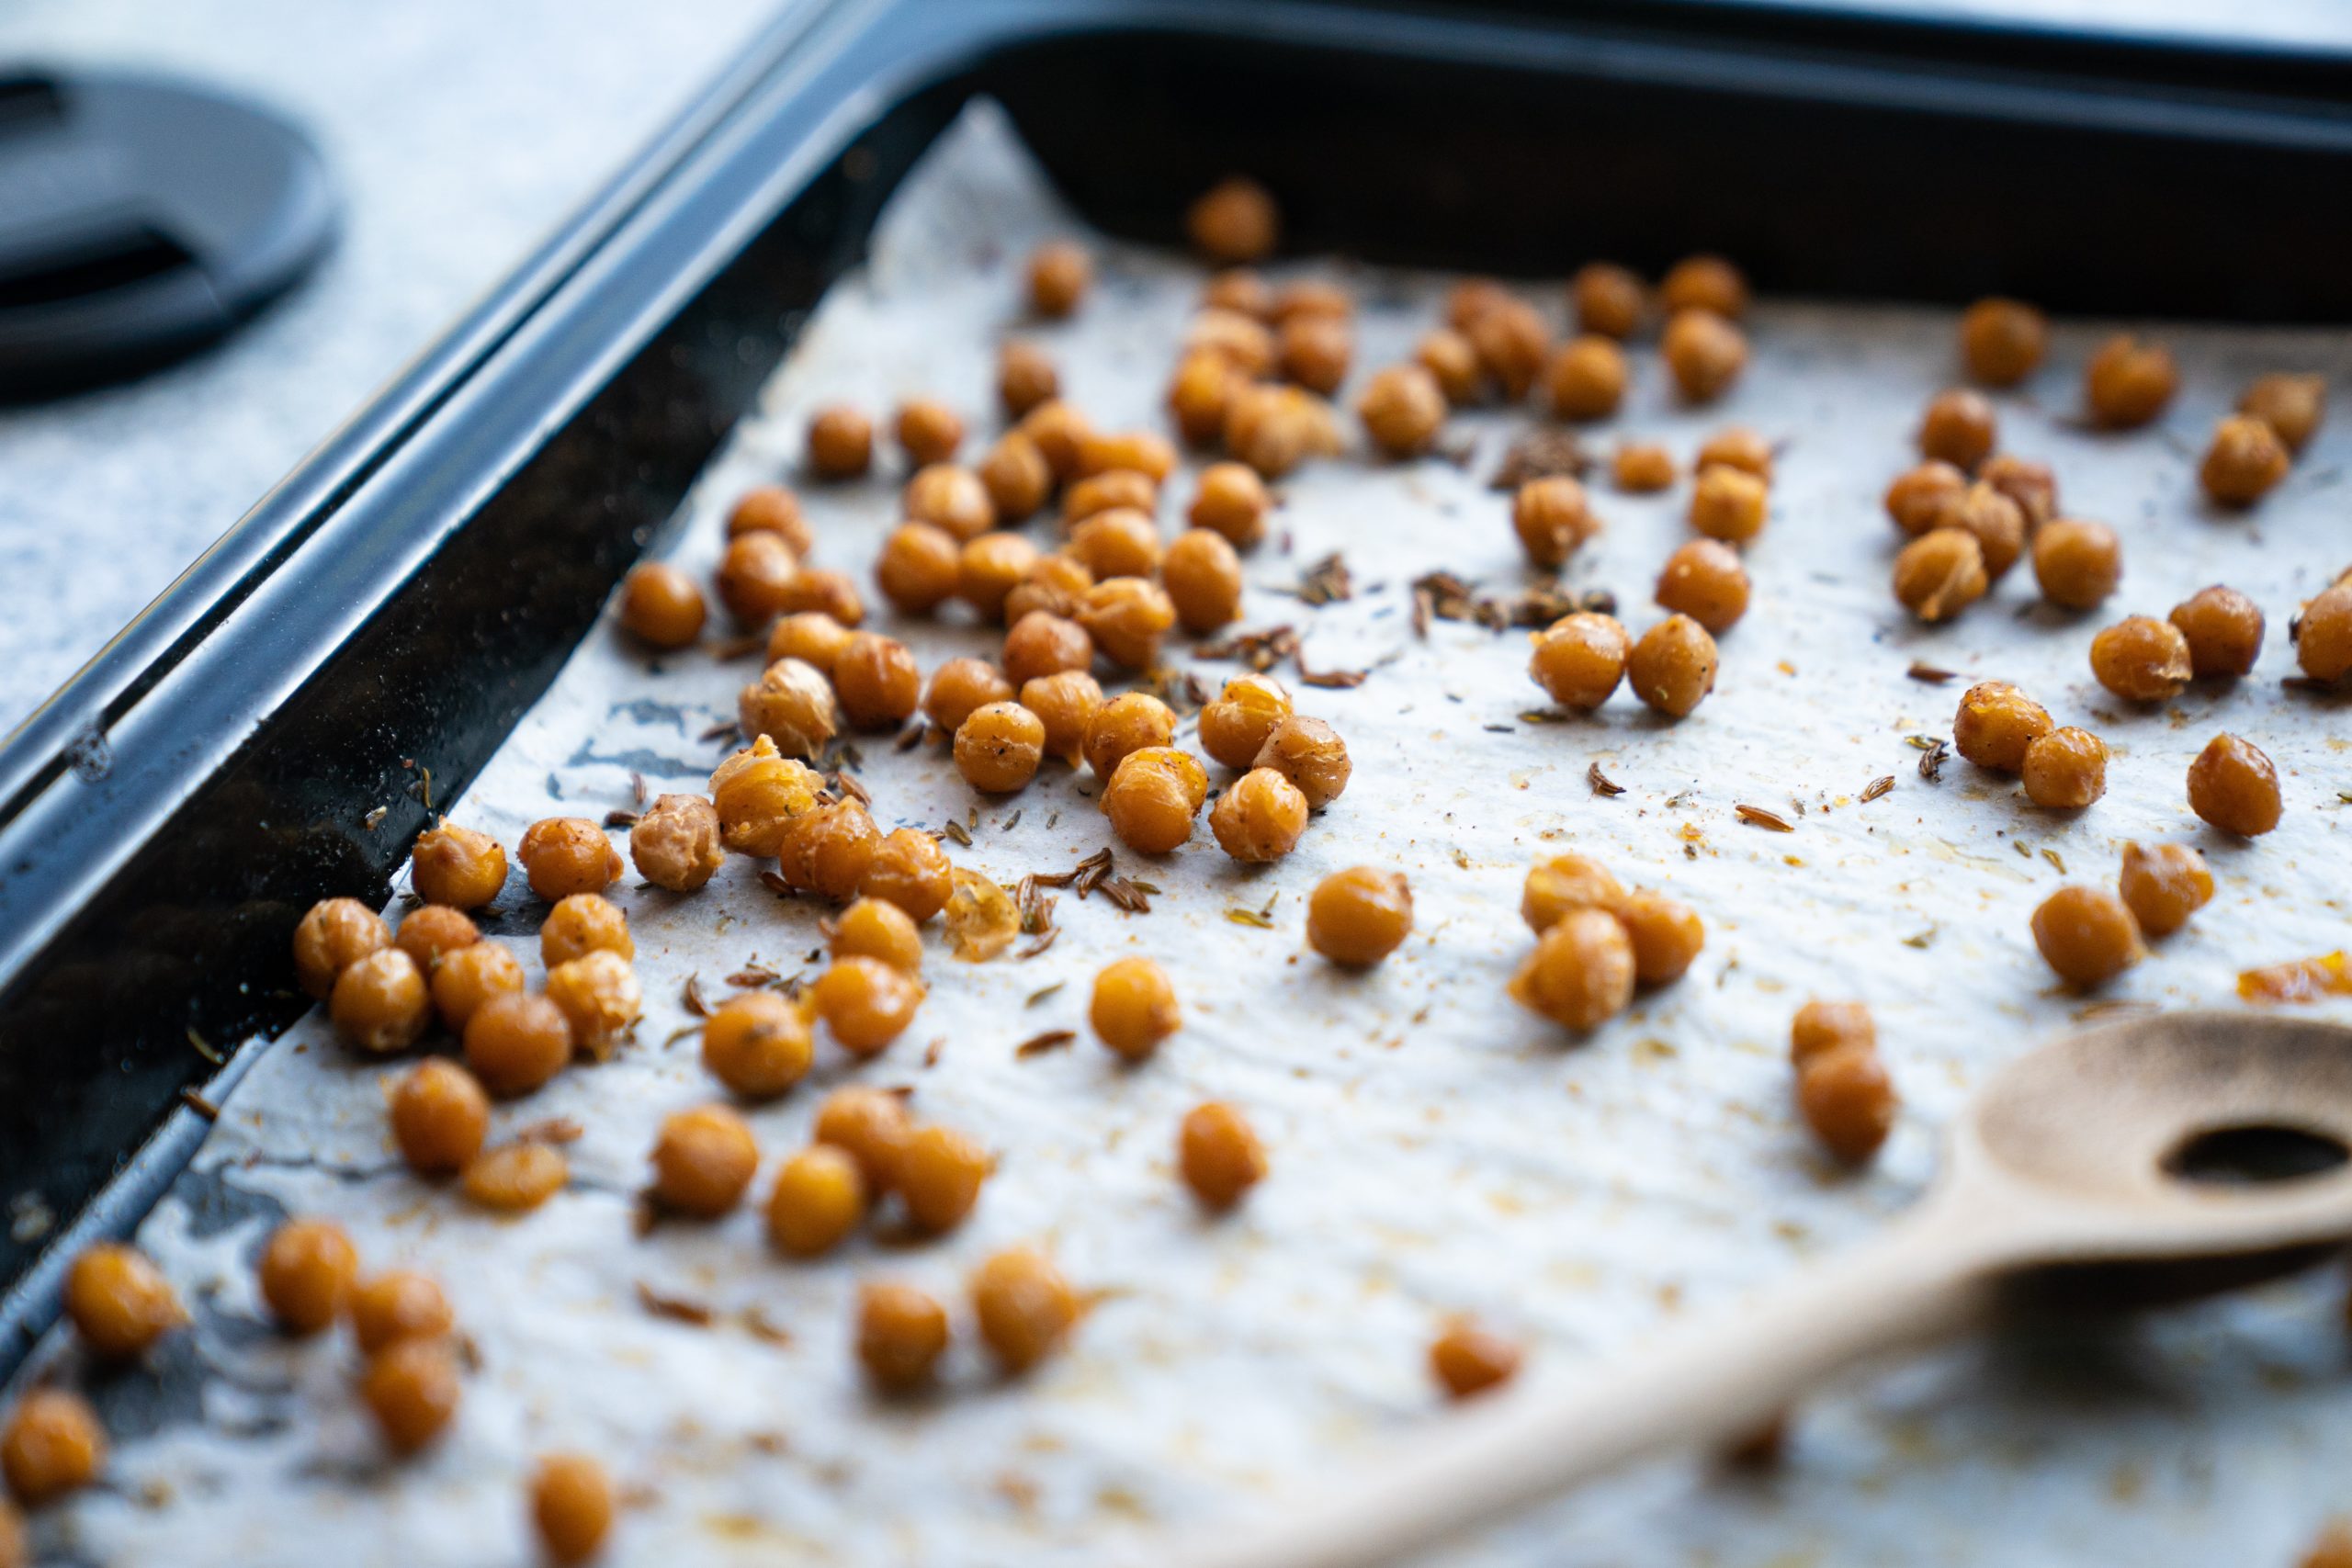 How To Cook Dried Chickpeas?